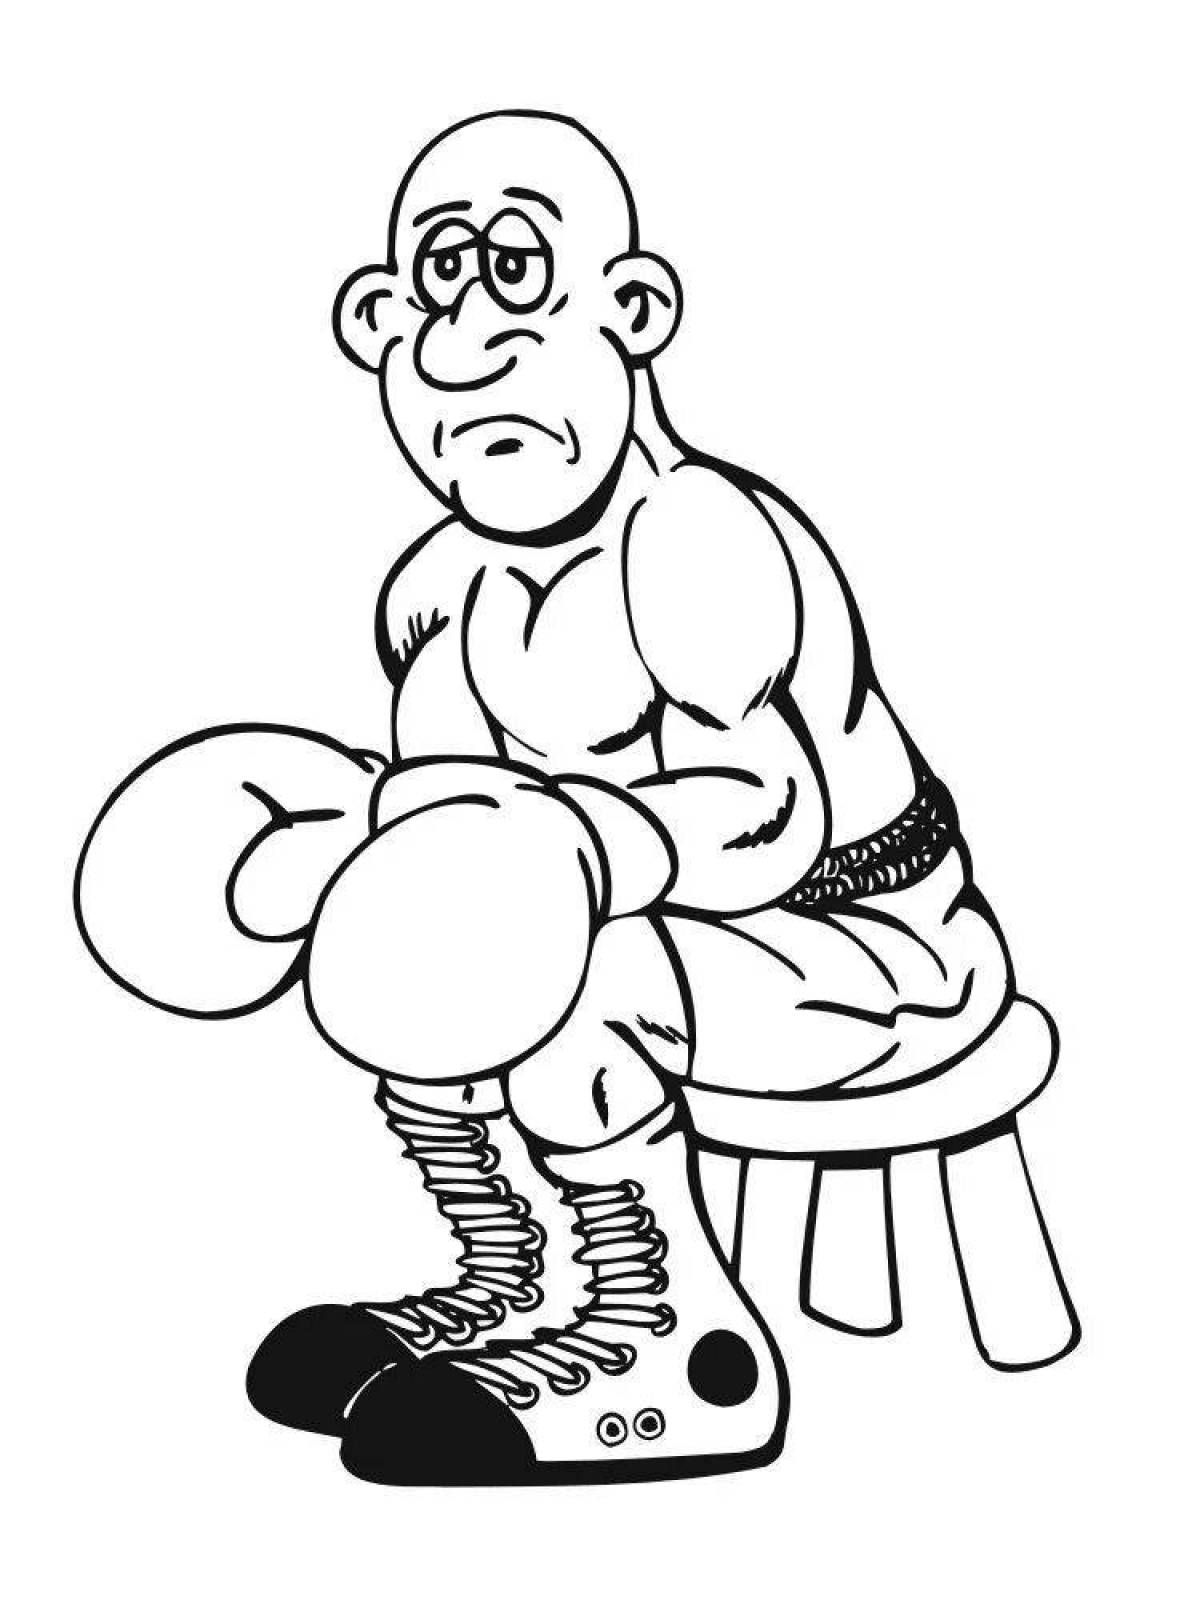 Animated boxer coloring page